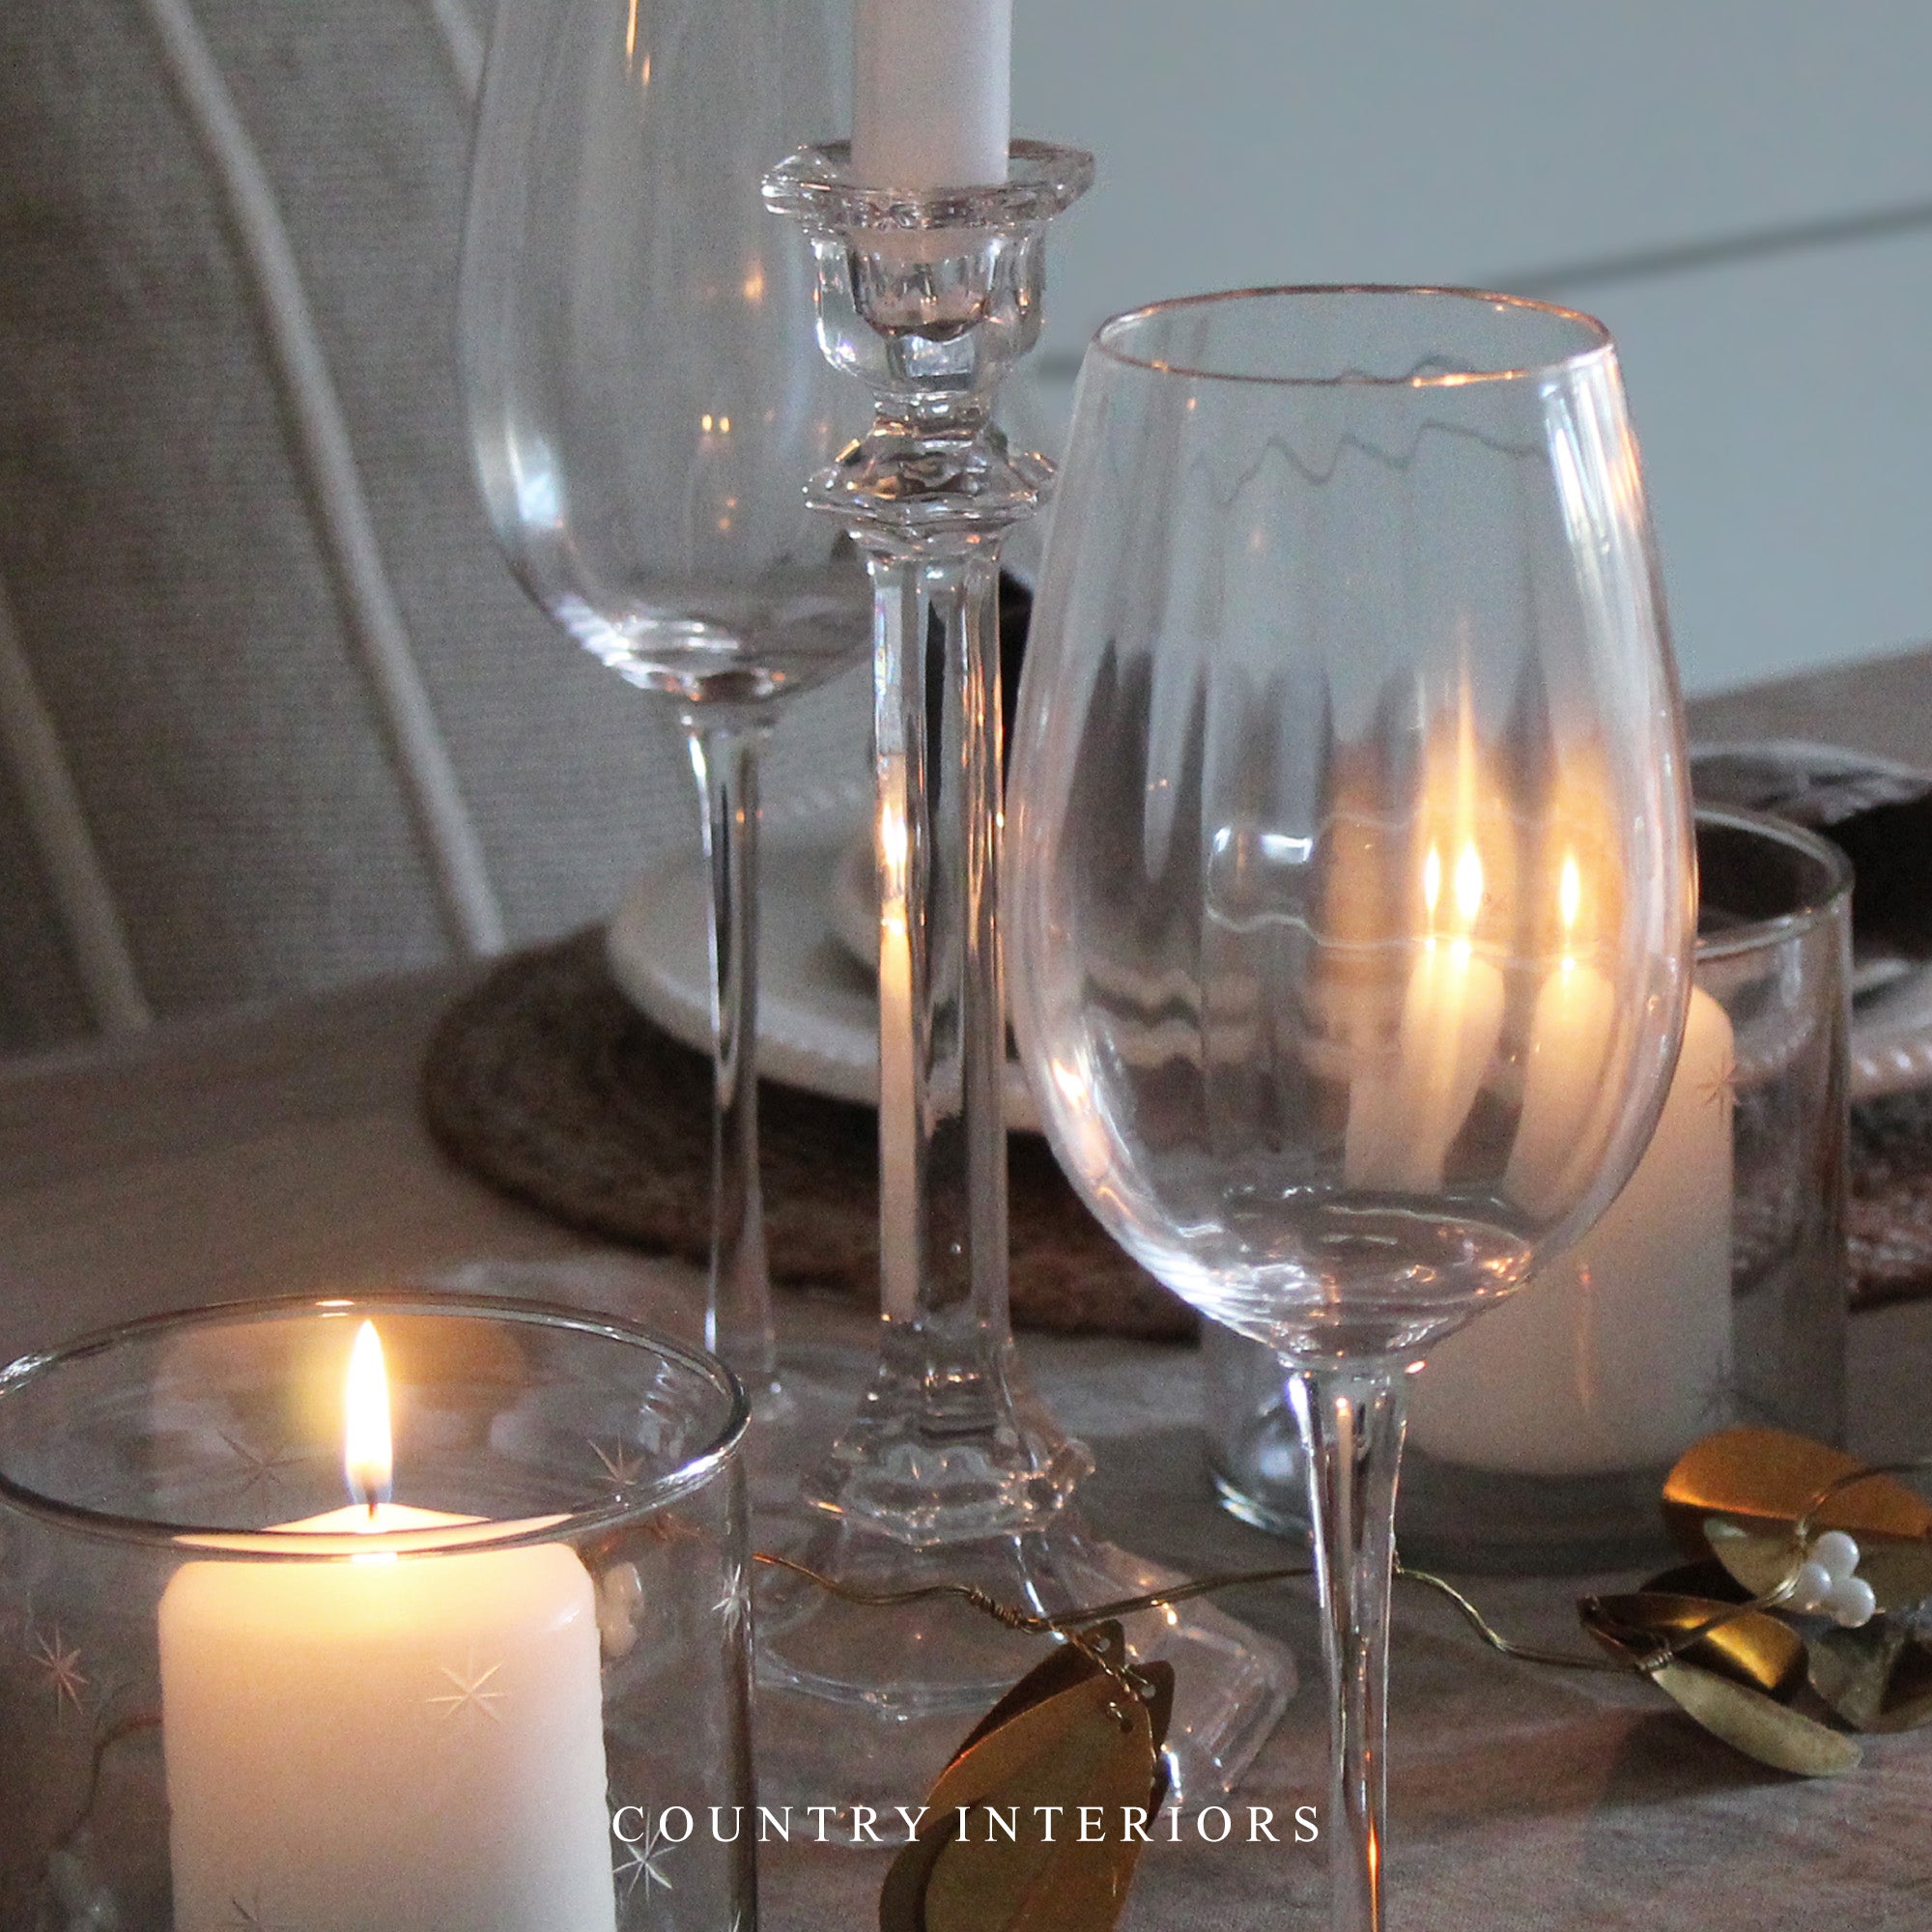 Set of Four Jolie Glasses - Two Sizes